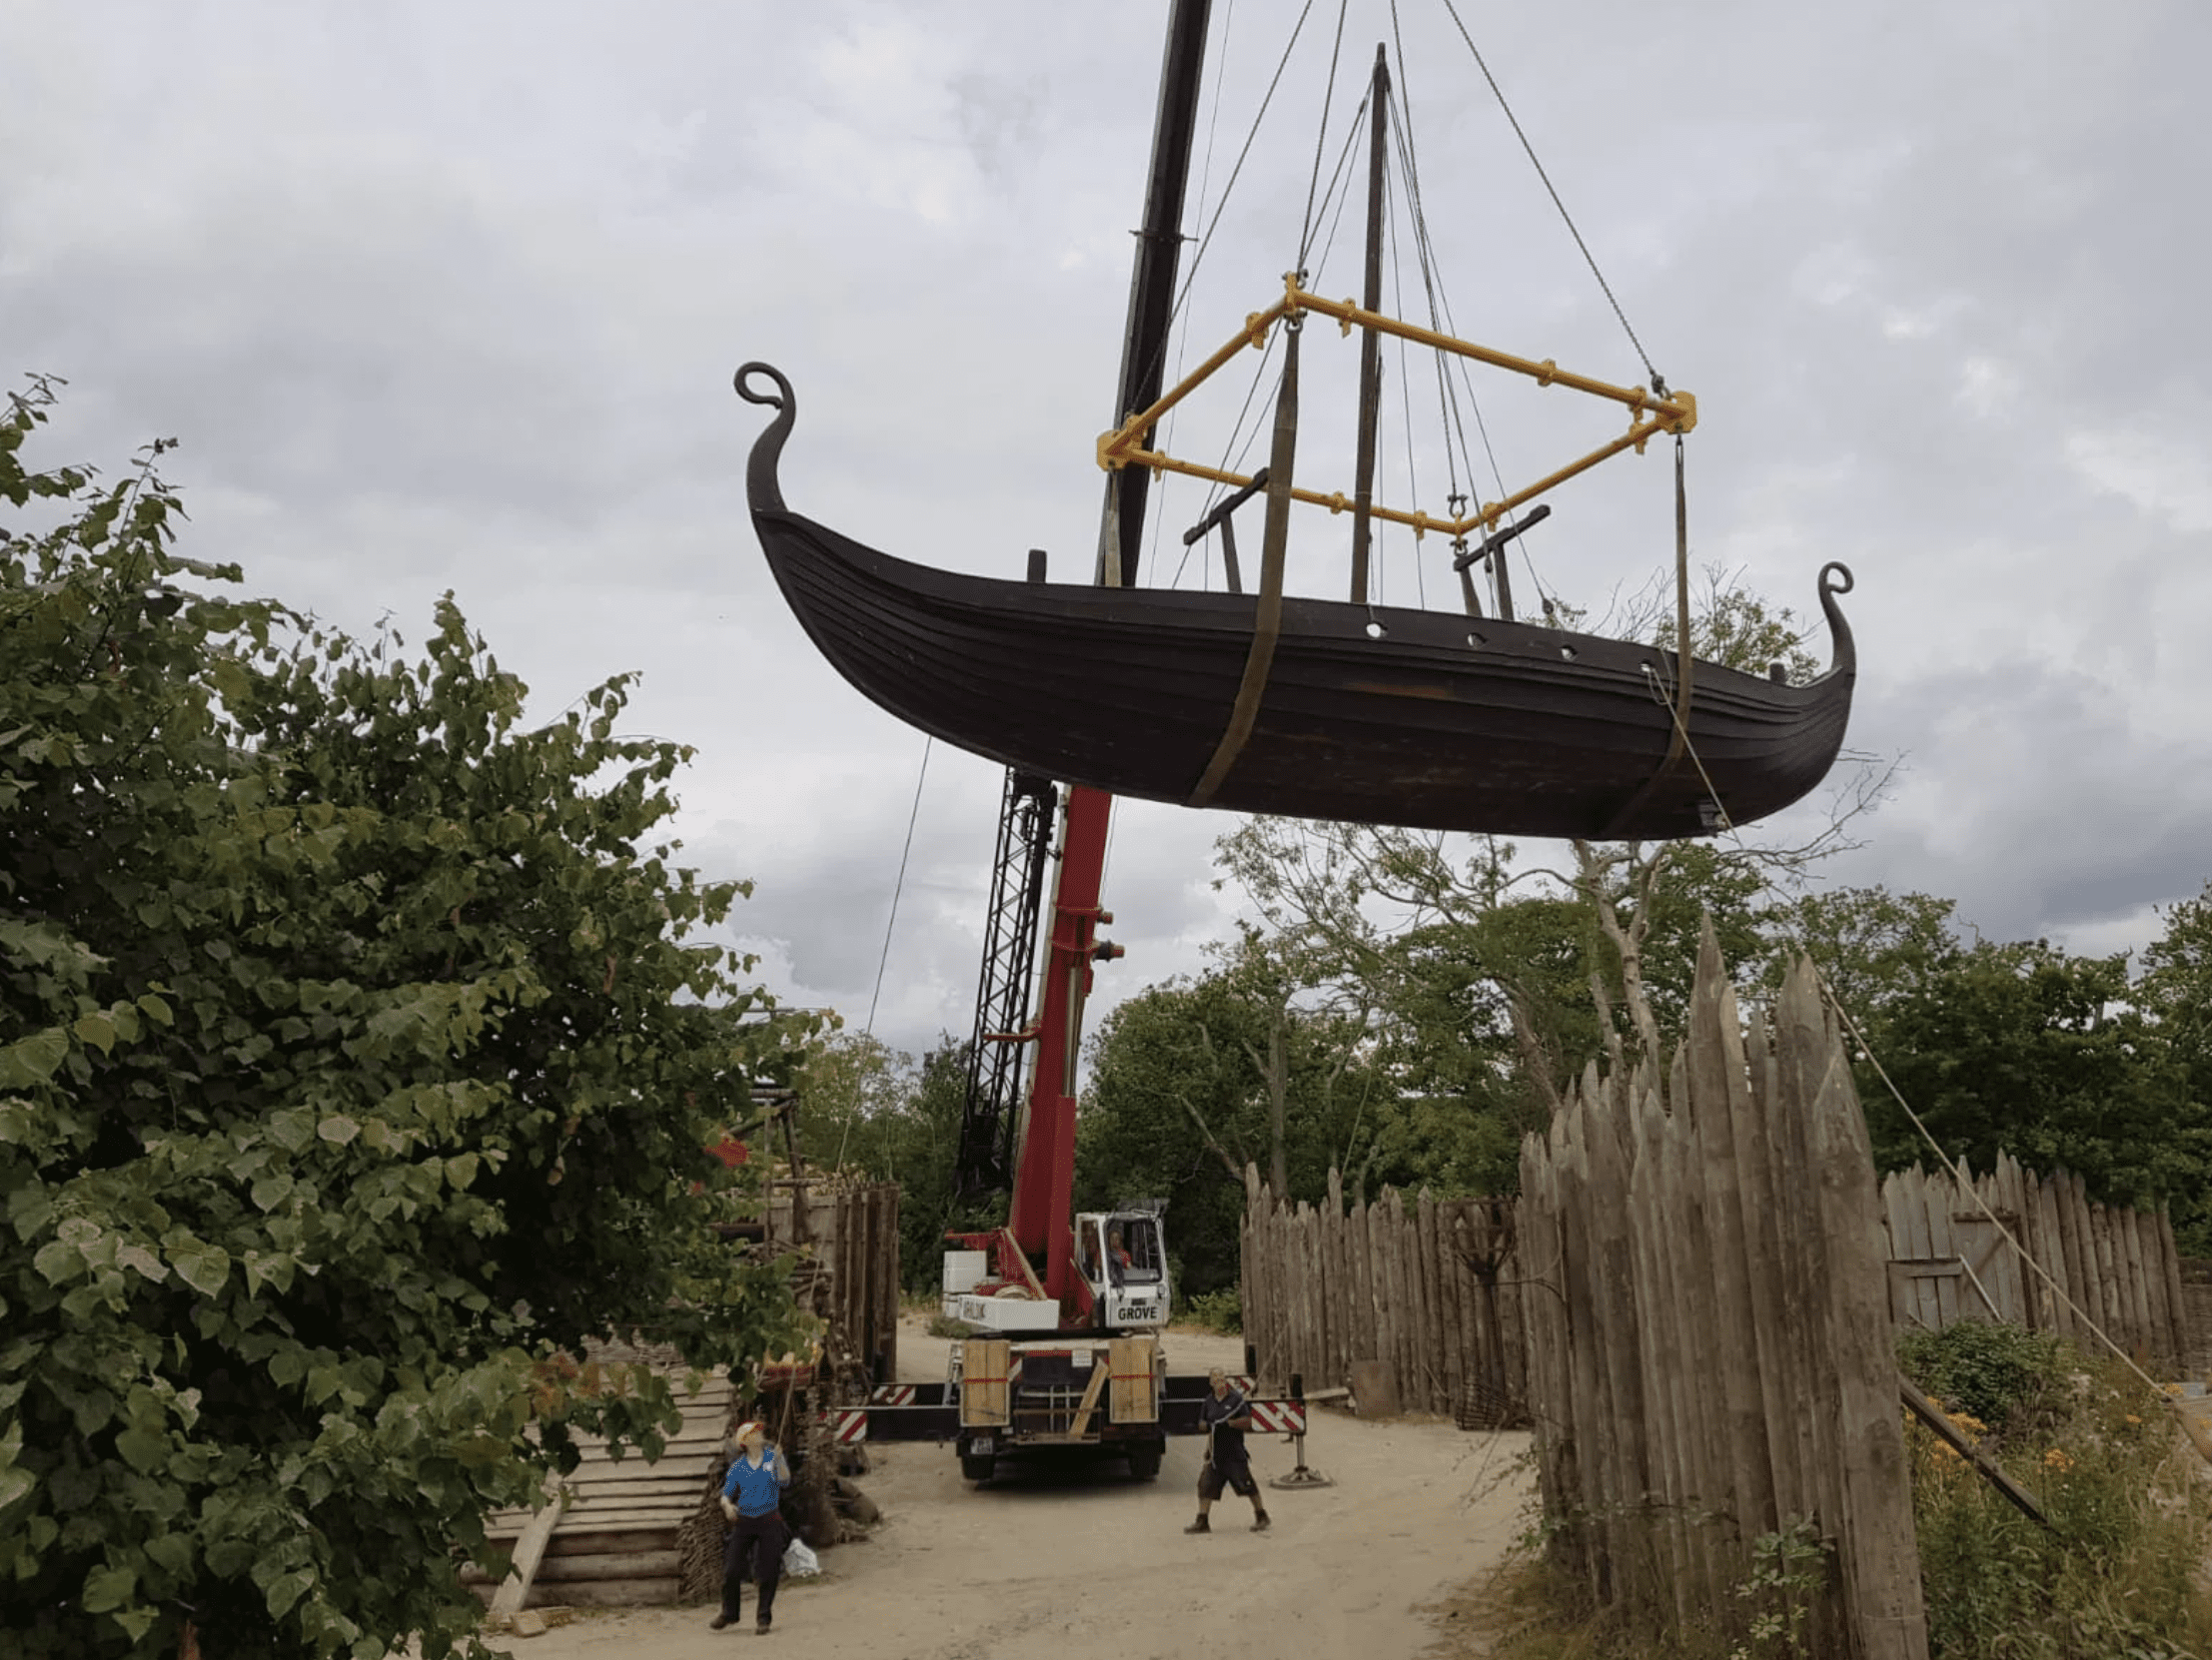 Modulift spreader beams in the lift of a viking boat